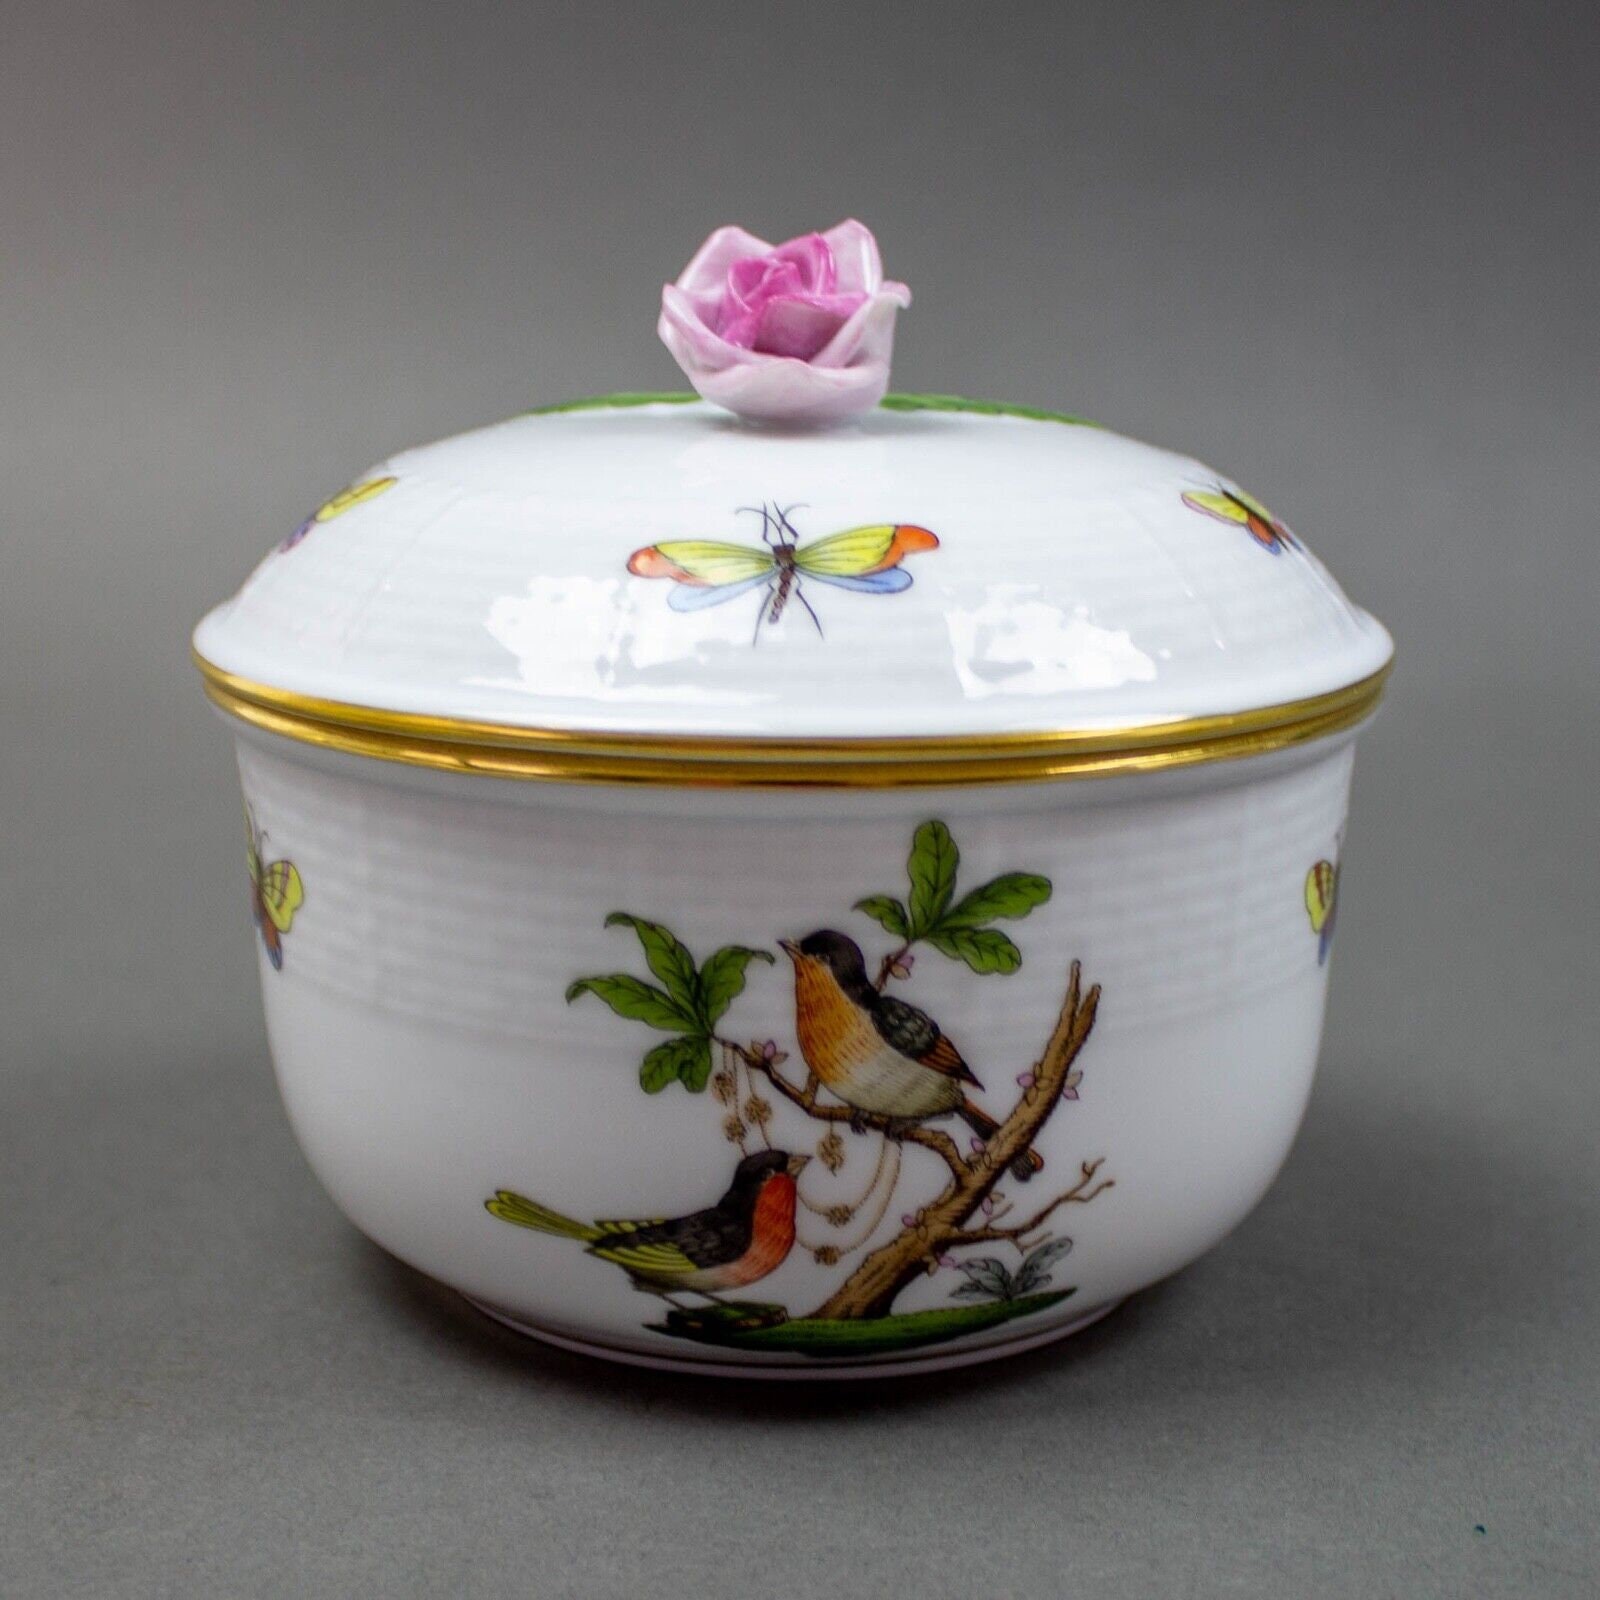 Herend Princess Victoria Gray Porcelain Covered Sugar With Rose 